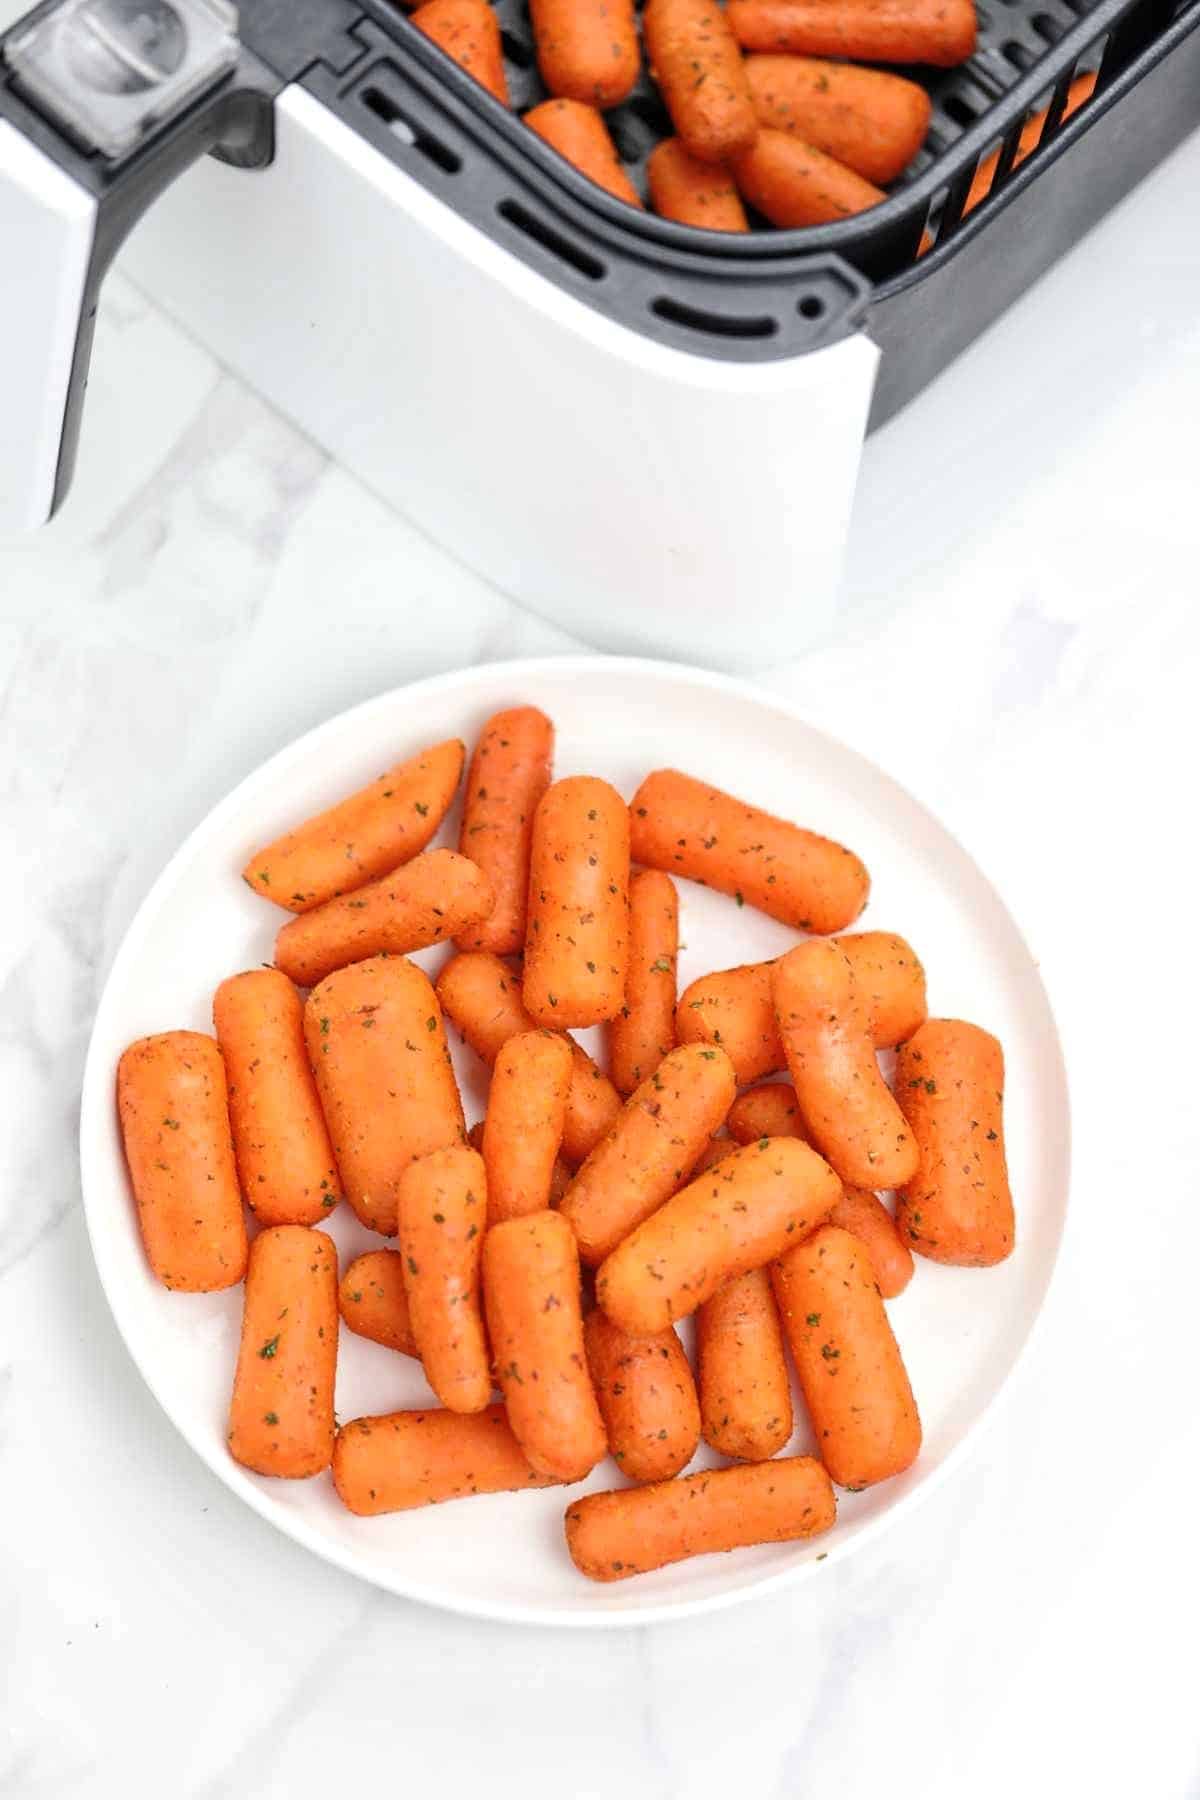 displayed on a white plate and in air fryer basket.